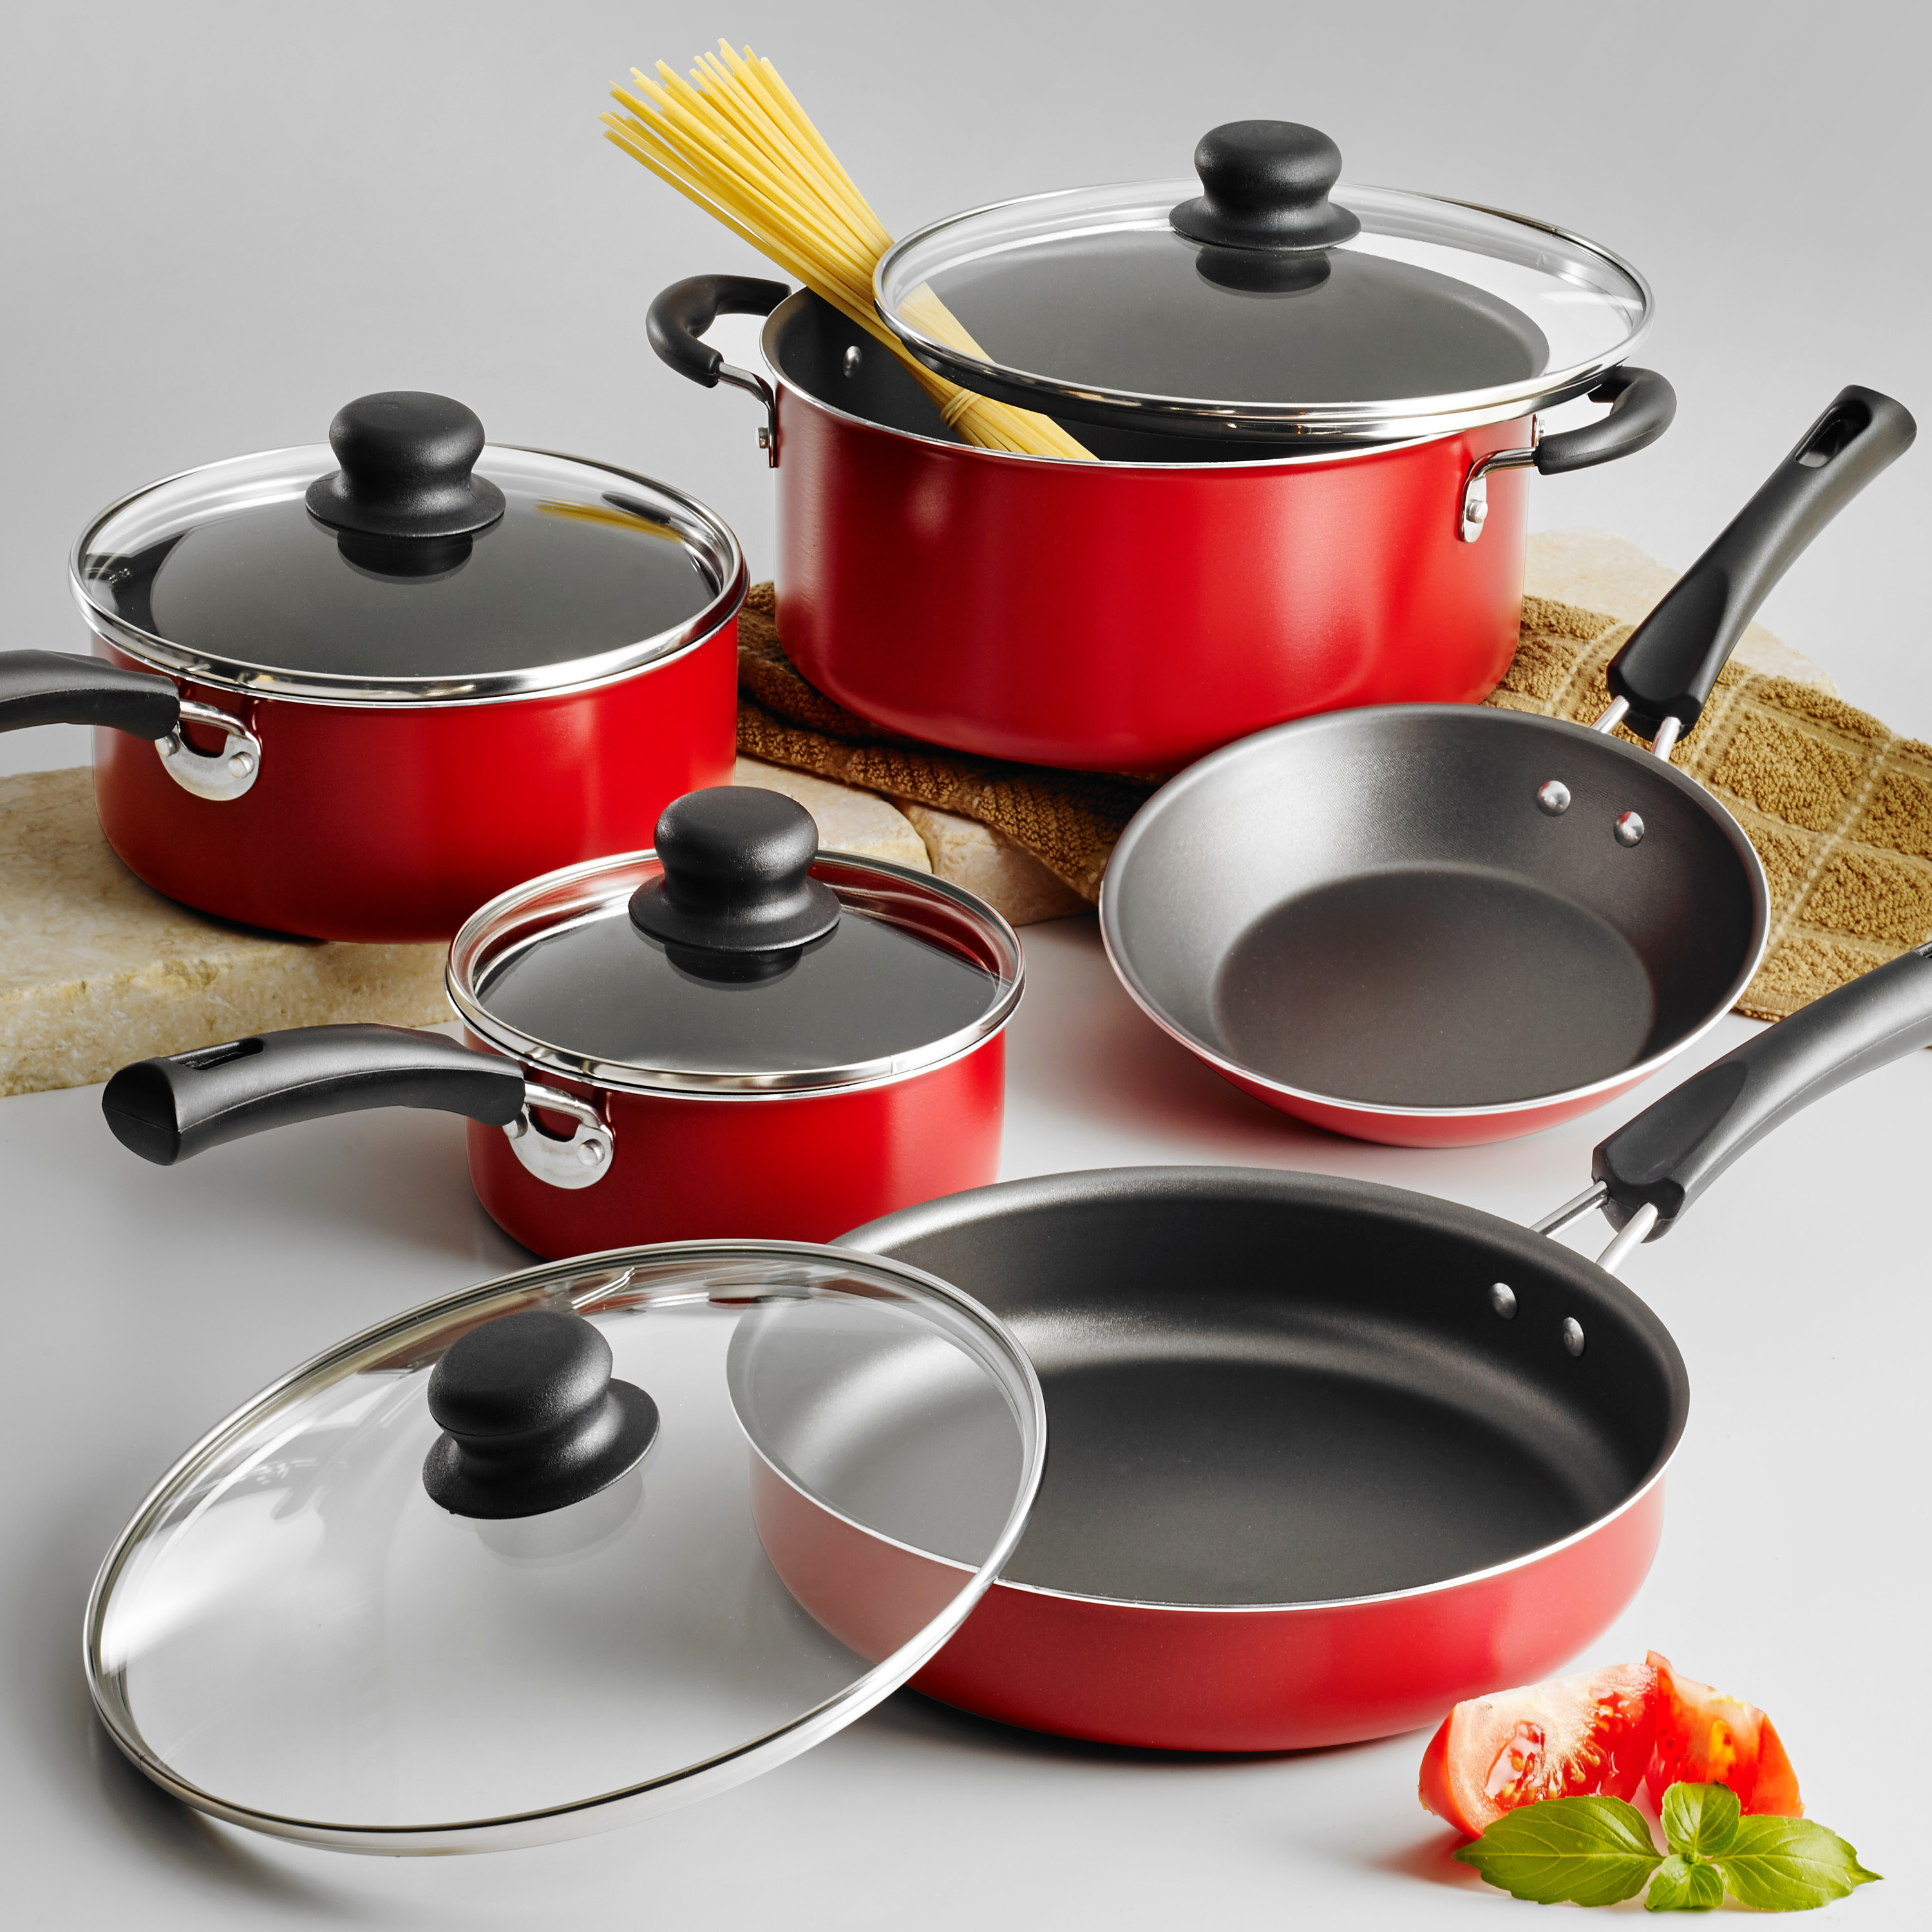 Tramontina 9-Piece Non-stick Cookware Set, Red - image 3 of 6